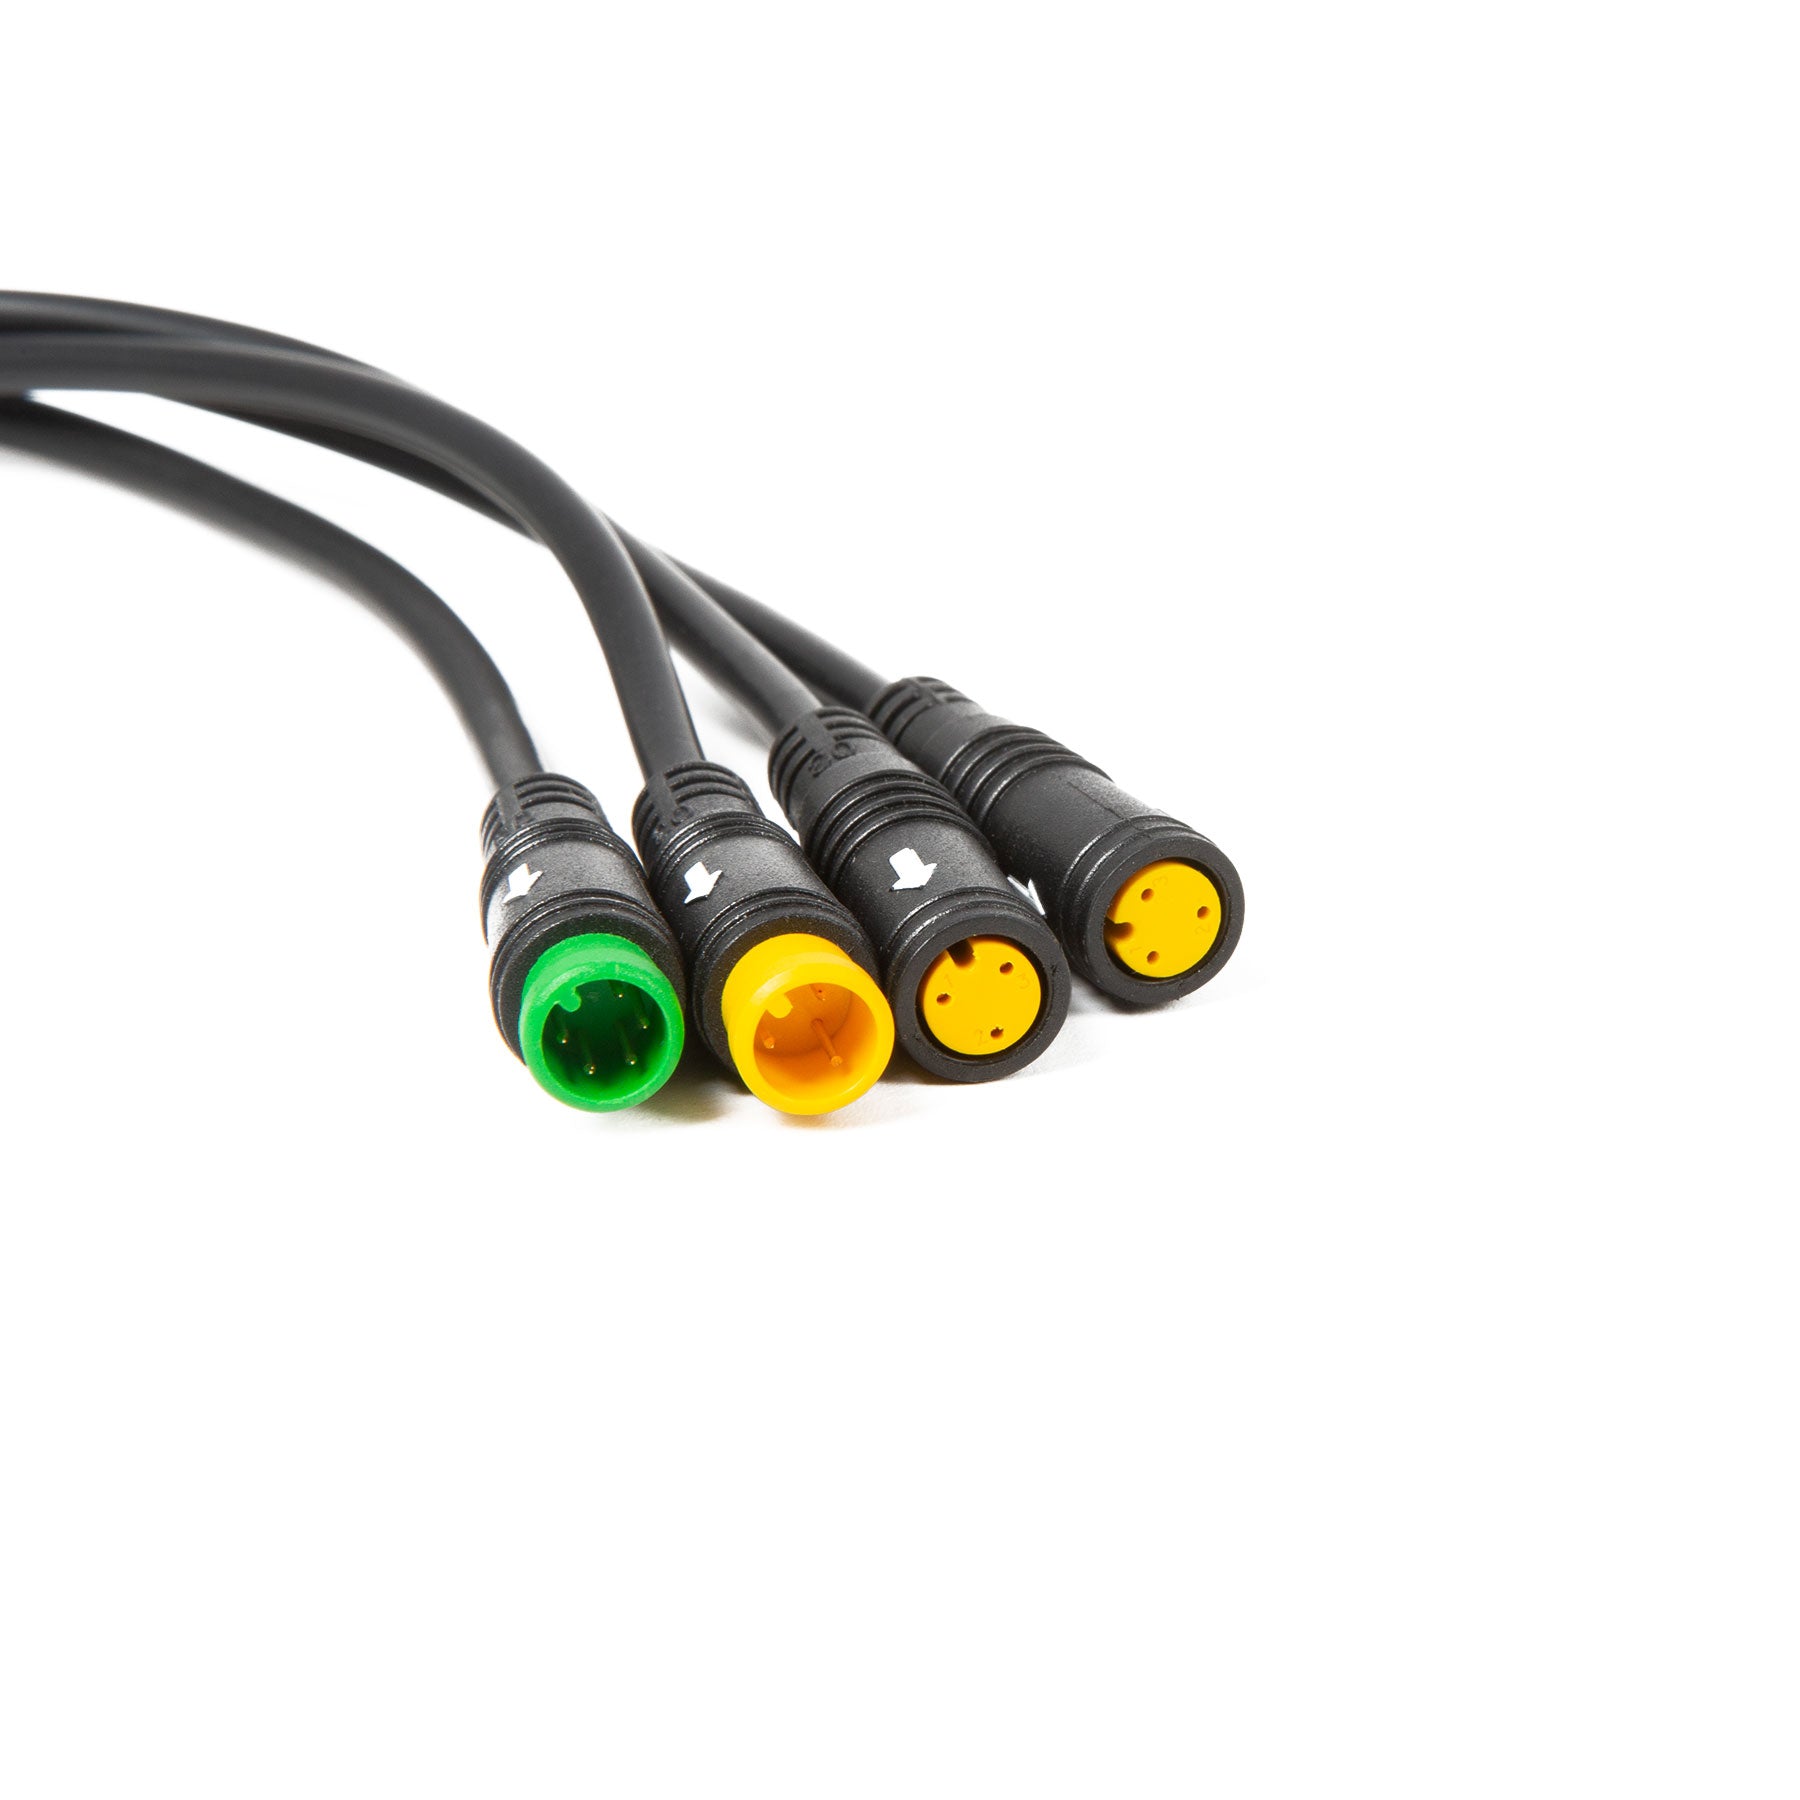 1T4 Cable For Specter S / Specter ST